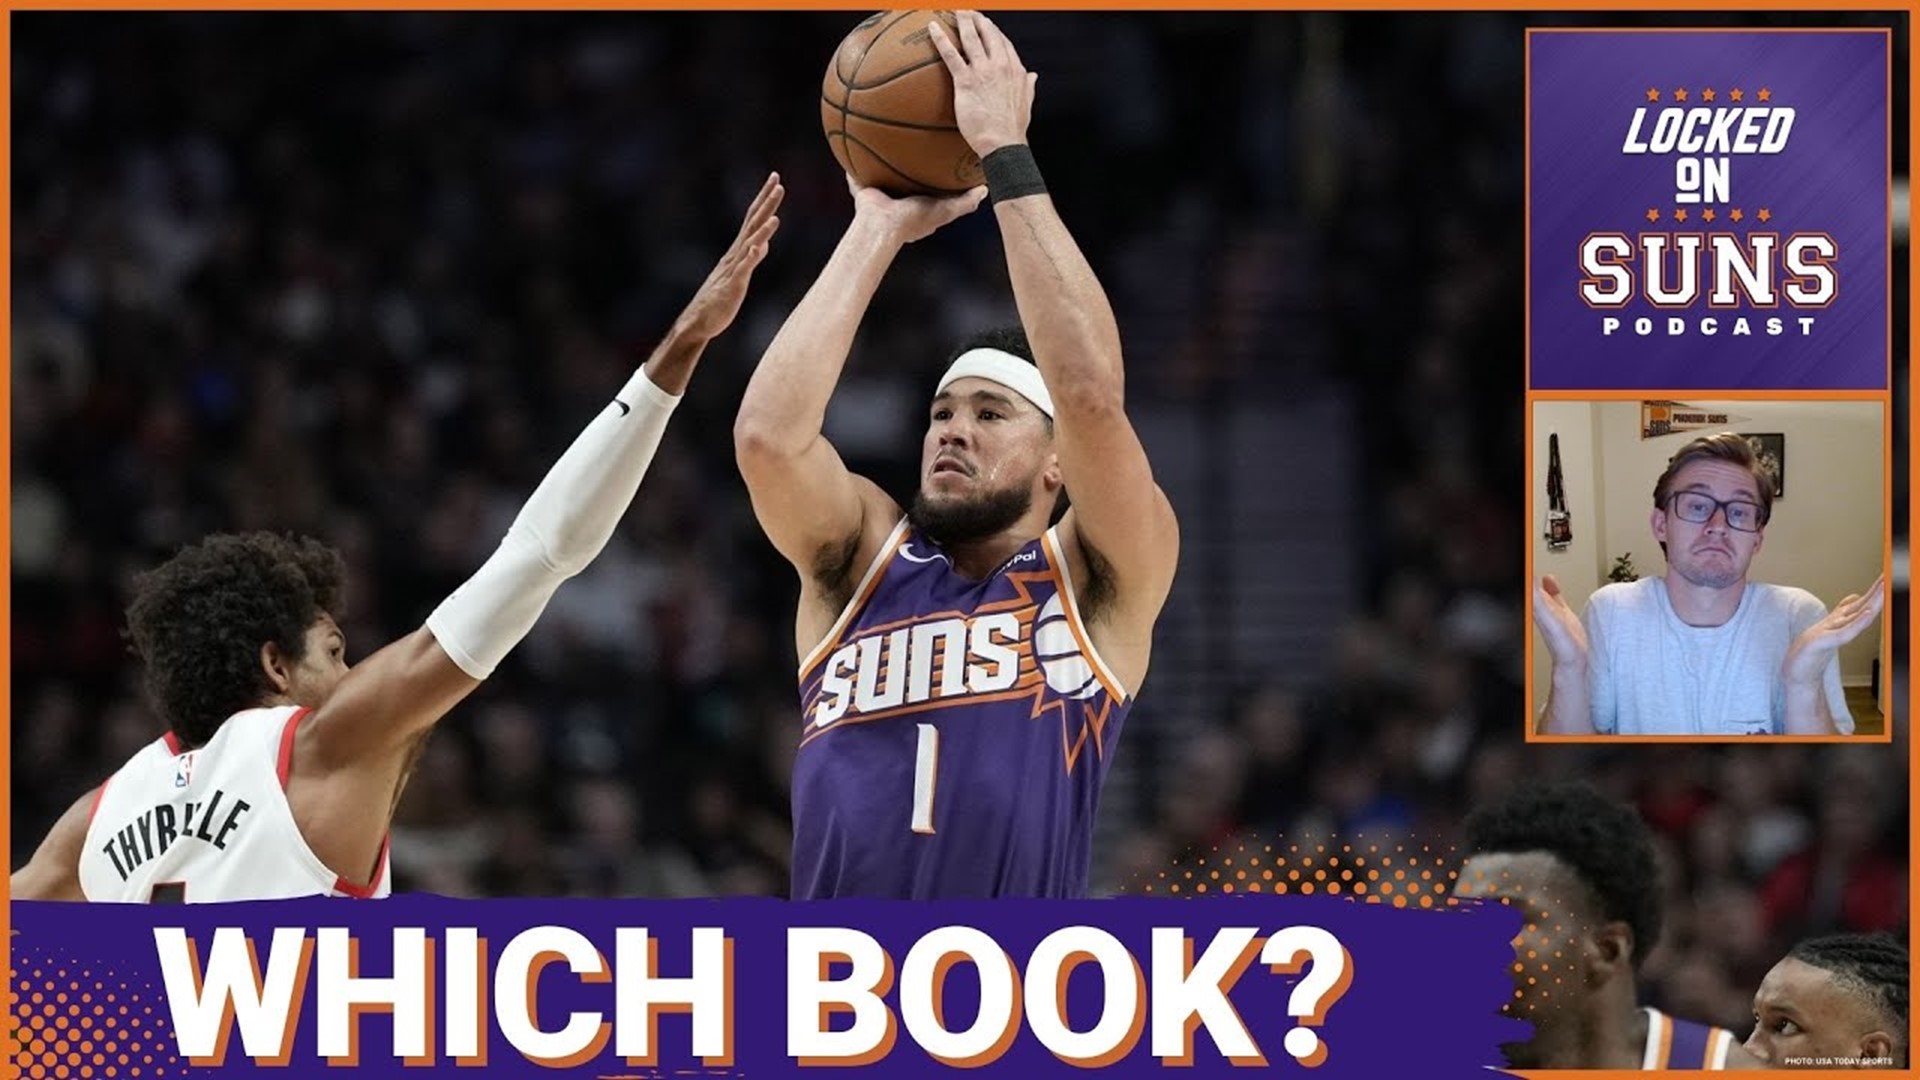 Devin Booker put up 52 in New Orleans after a strange stretch for the Phoenix Suns star. Will it continue?